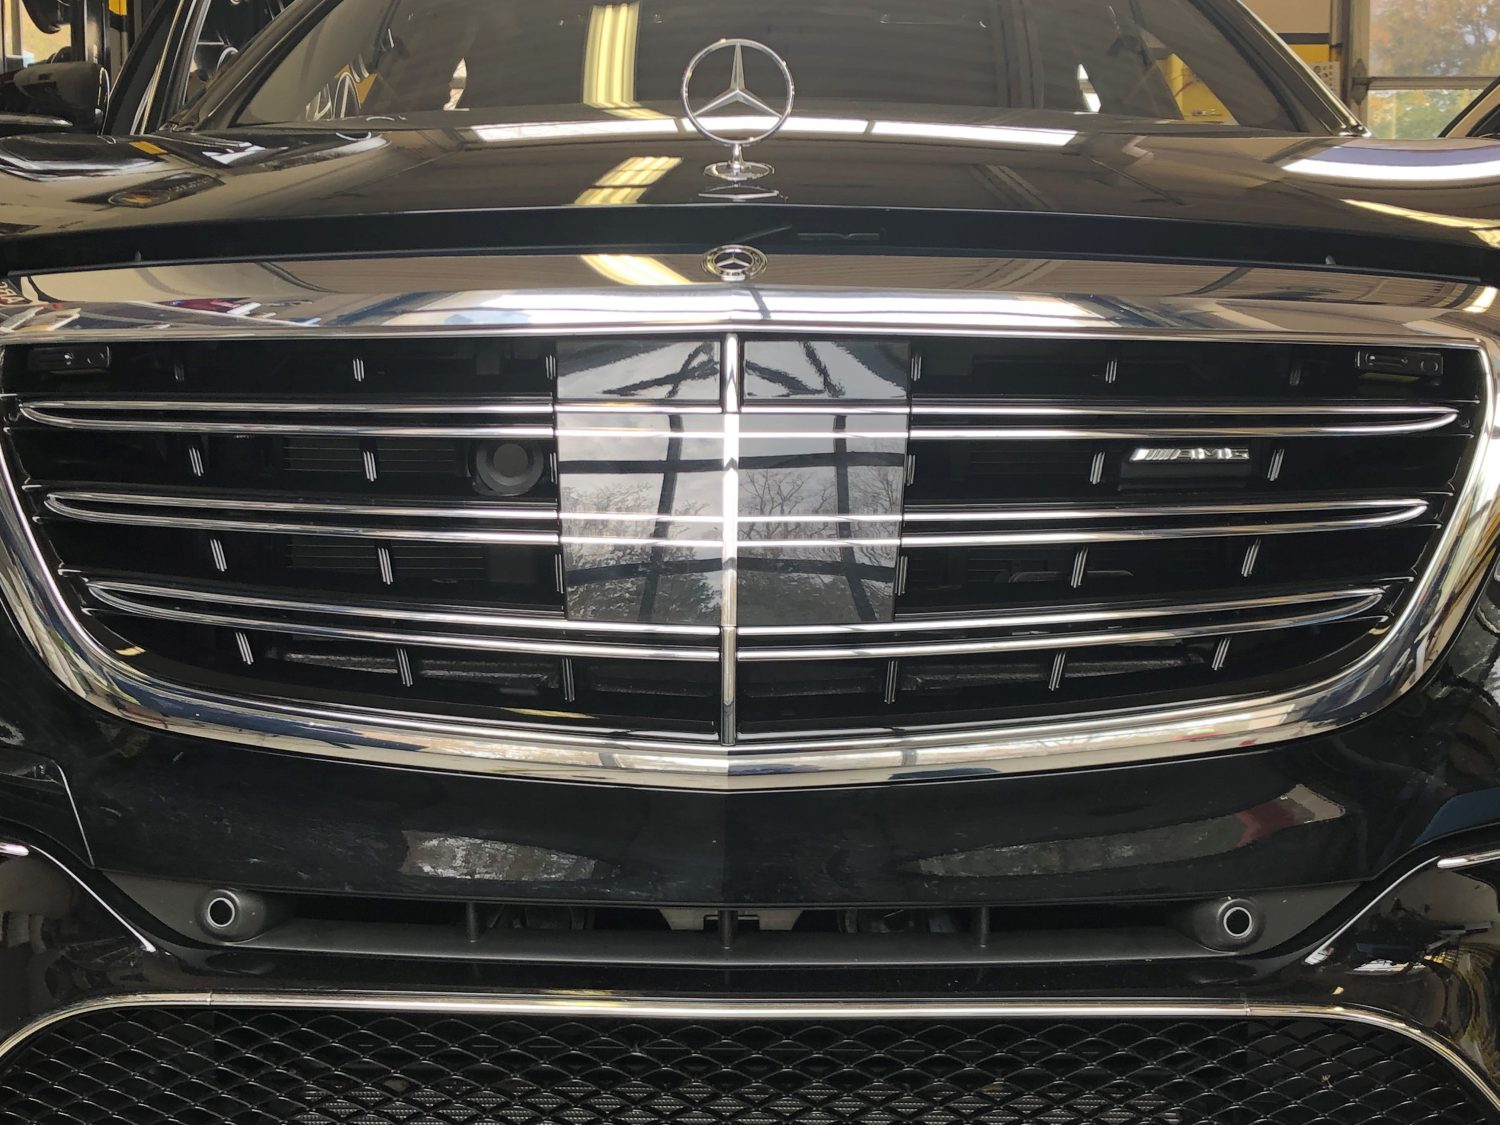 Custom K40 Police Laser Jammers and Hidden Radar Receiver Installed on 2018 Mercedes Benz S65 AMG in Cary, NC